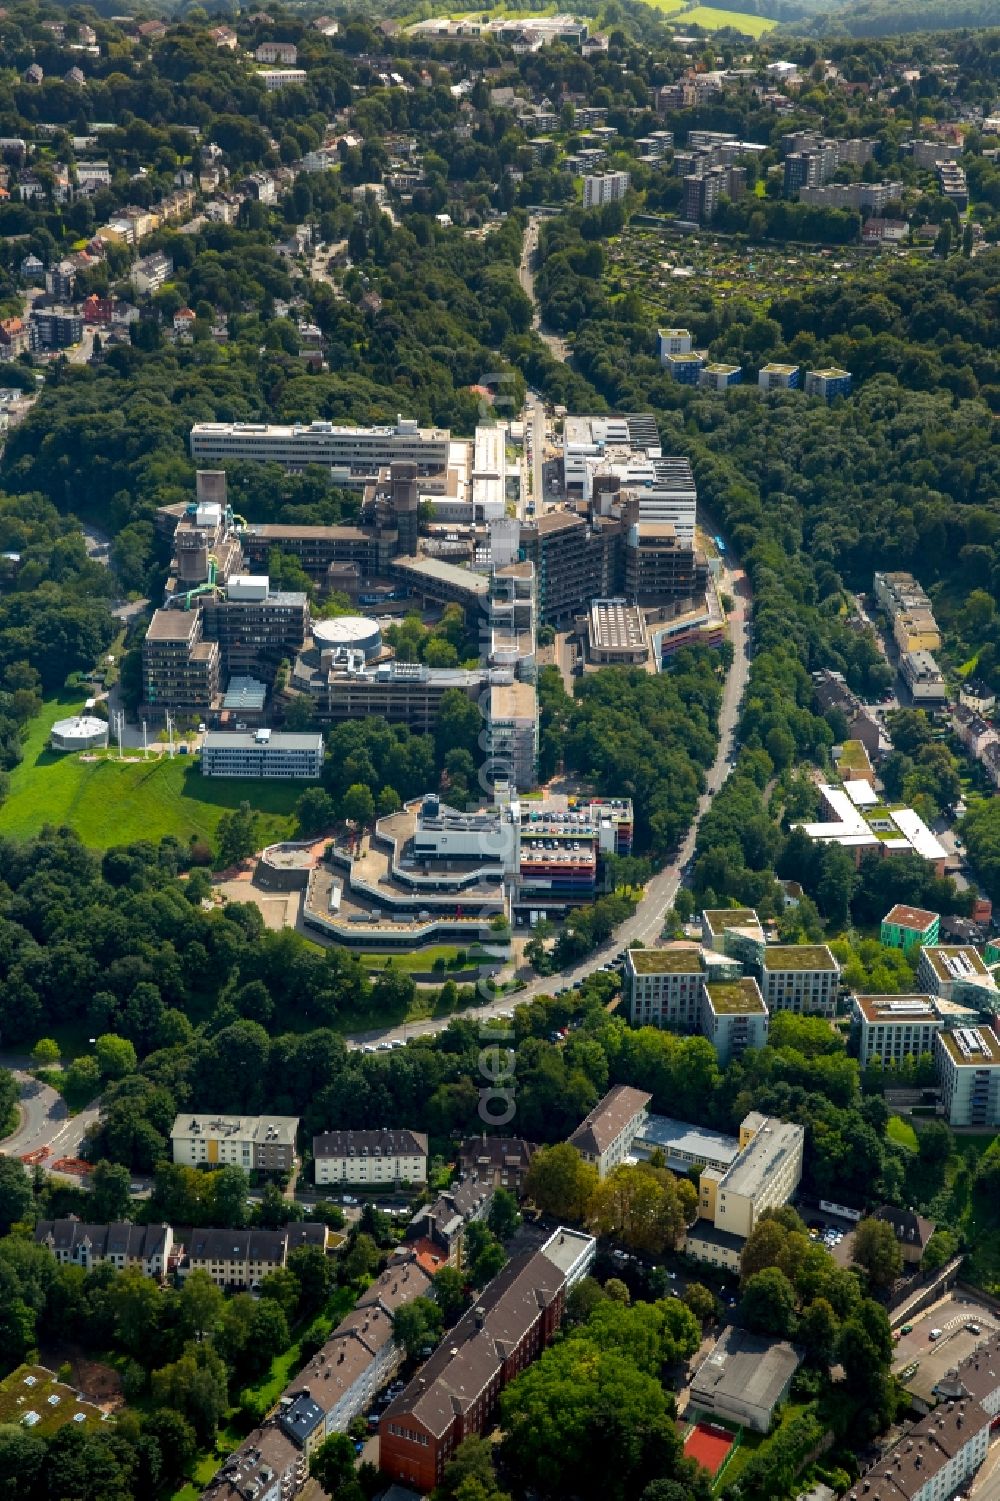 Aerial image Wuppertal - Campus building of the university Bergische Universitaet Wuppertal besides the road Max-Horkheimer-Strasse and nearby residential areas in Wuppertal in the state North Rhine-Westphalia